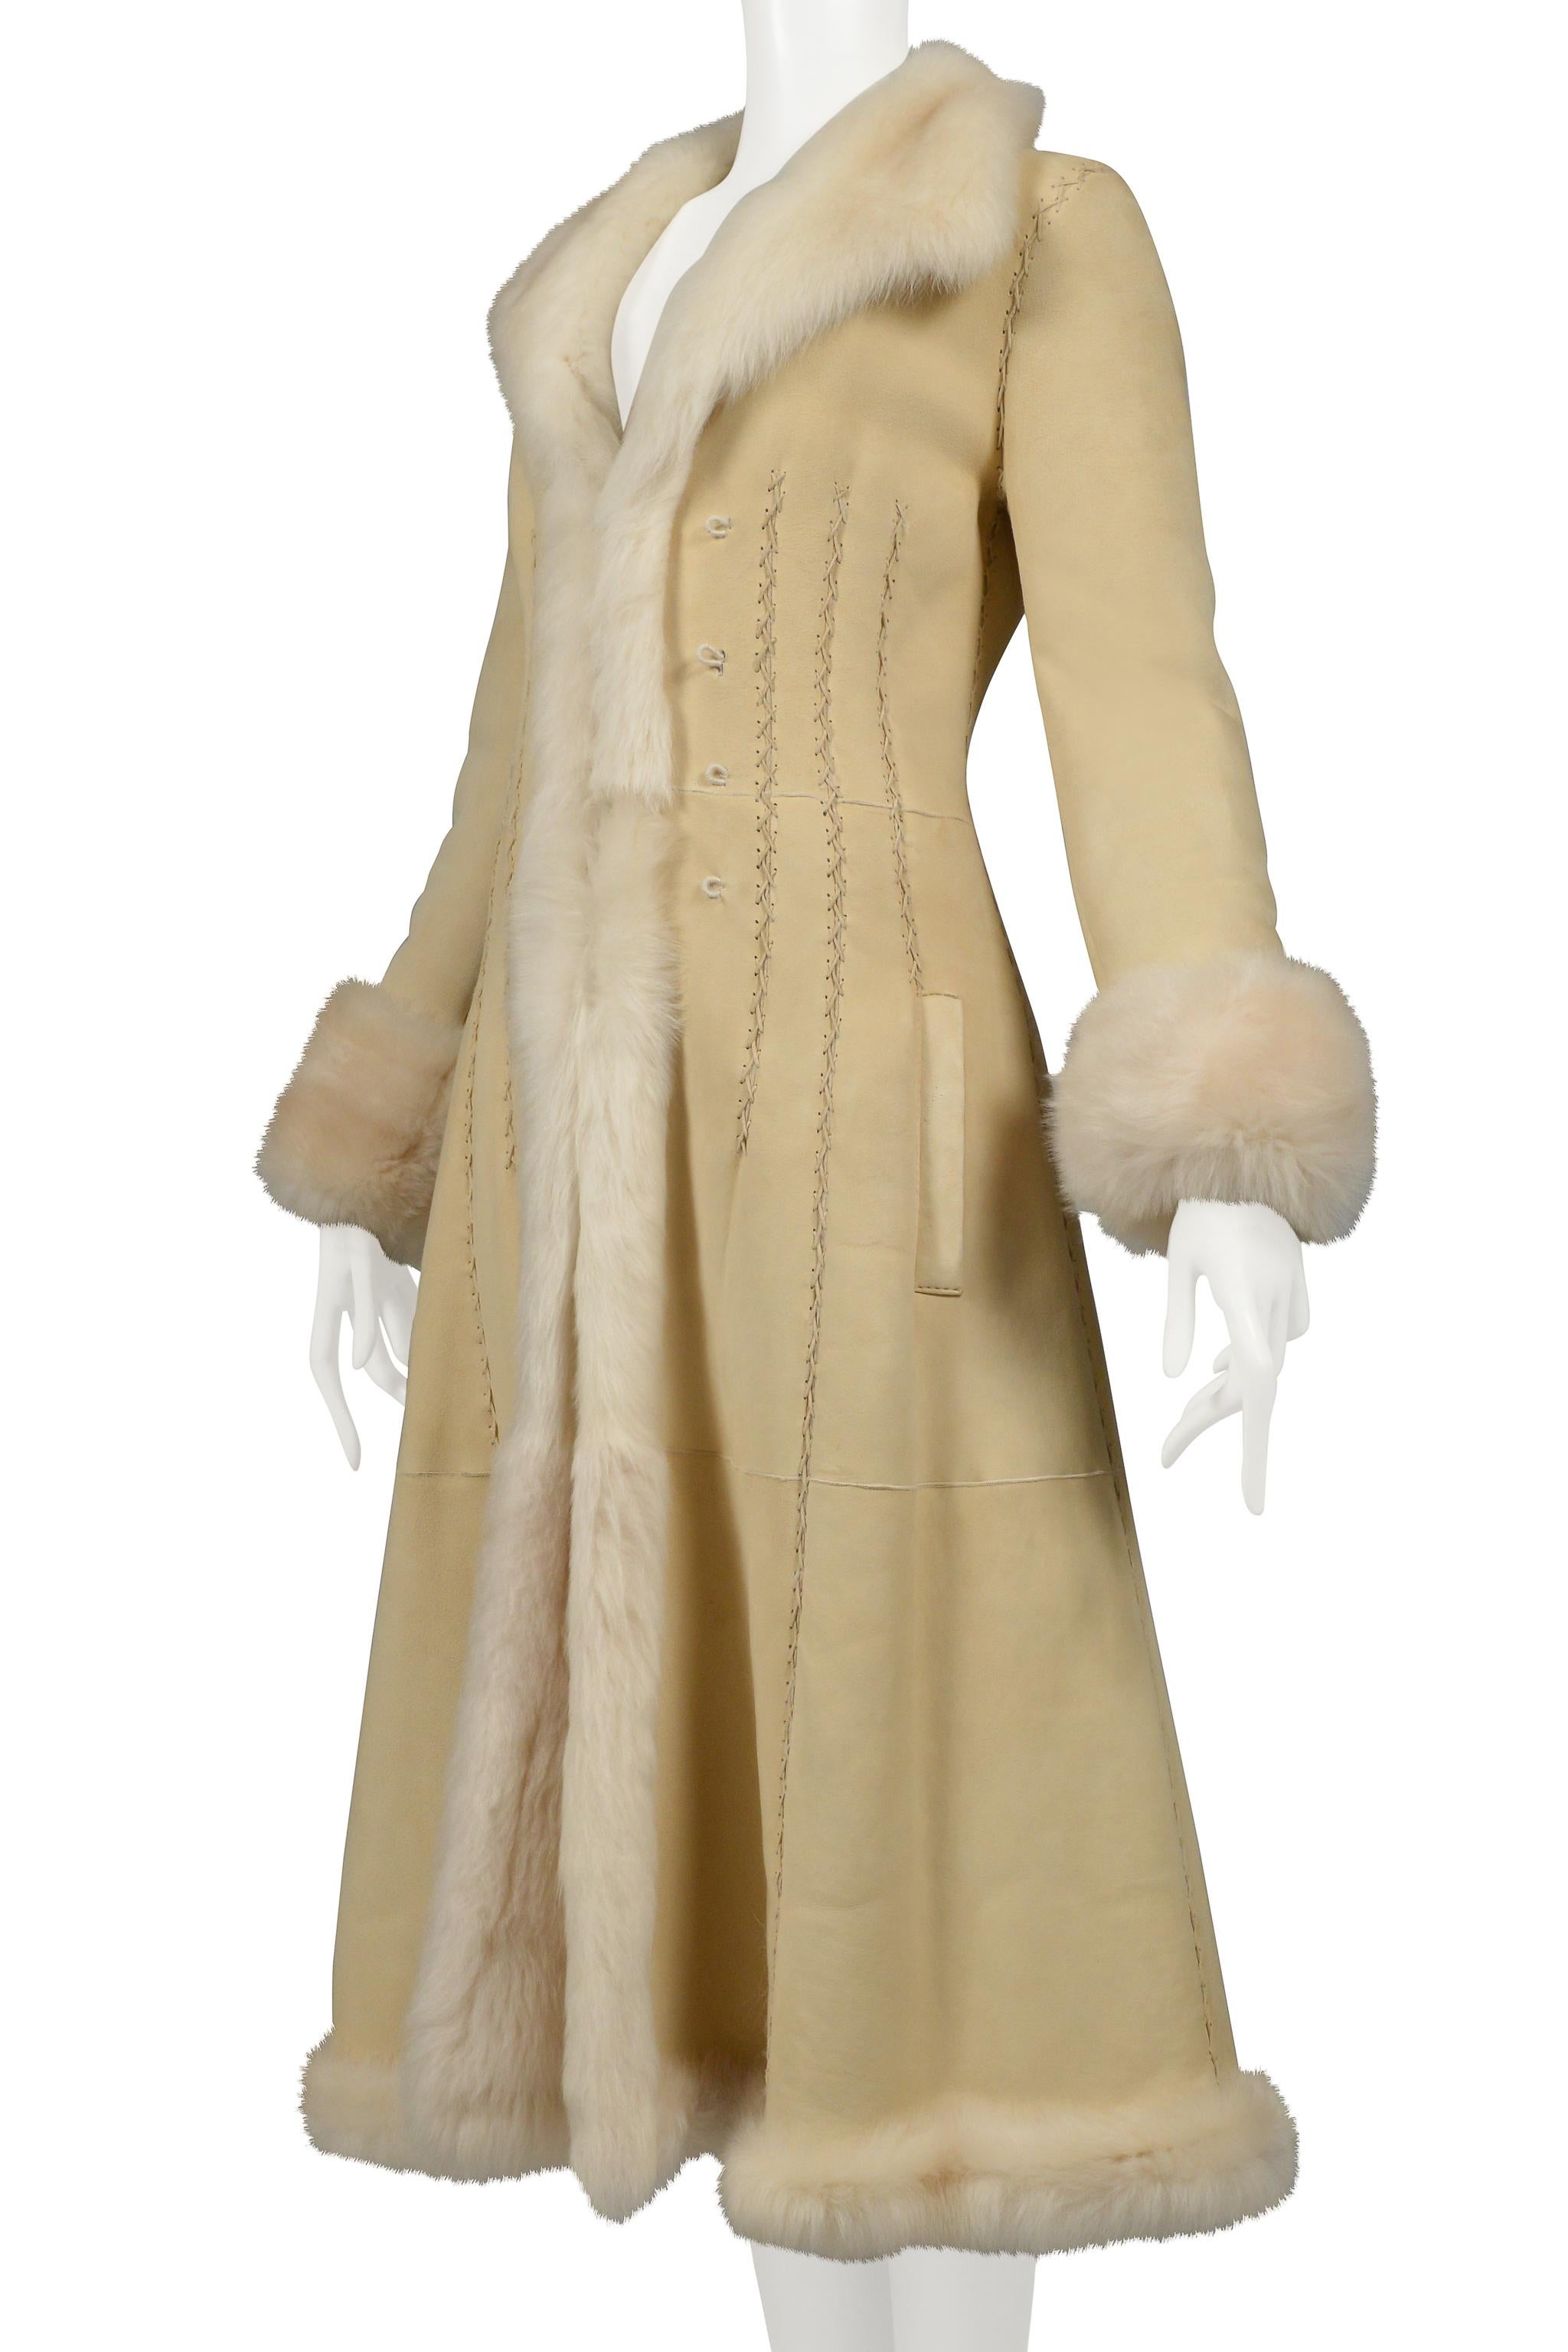 Iconic Alexander Mcqueen Off-White Suede Coat With Luxe Shearling Interior 2